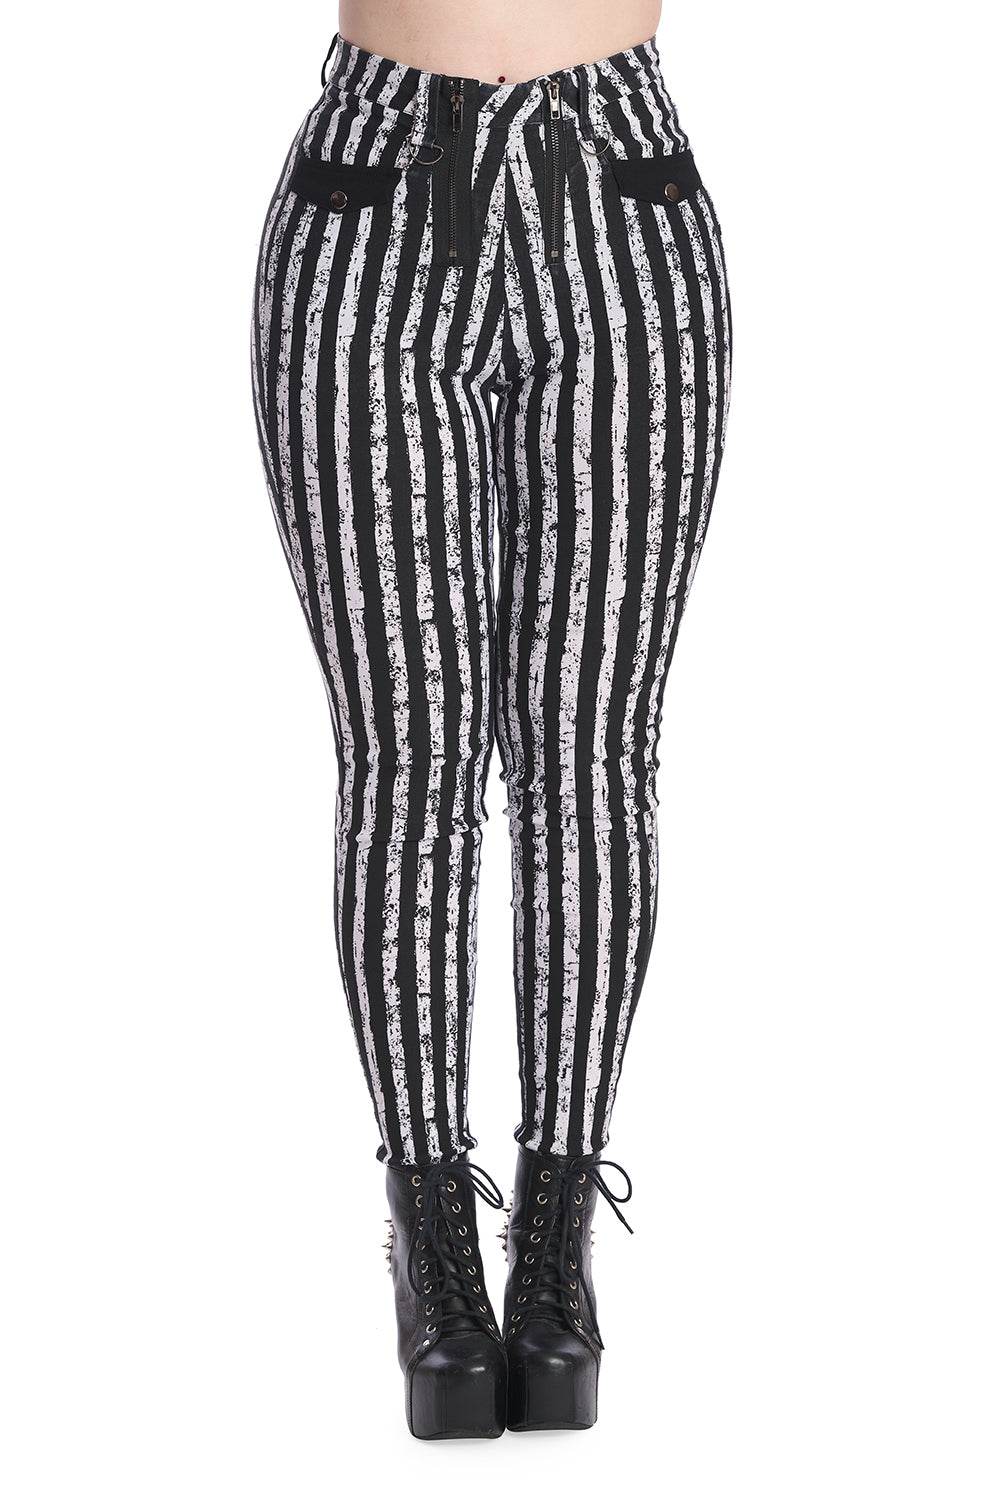 Alternative model in mesh black crop top with high waisted black and white striped skinny legged trousers with distressed colour. 